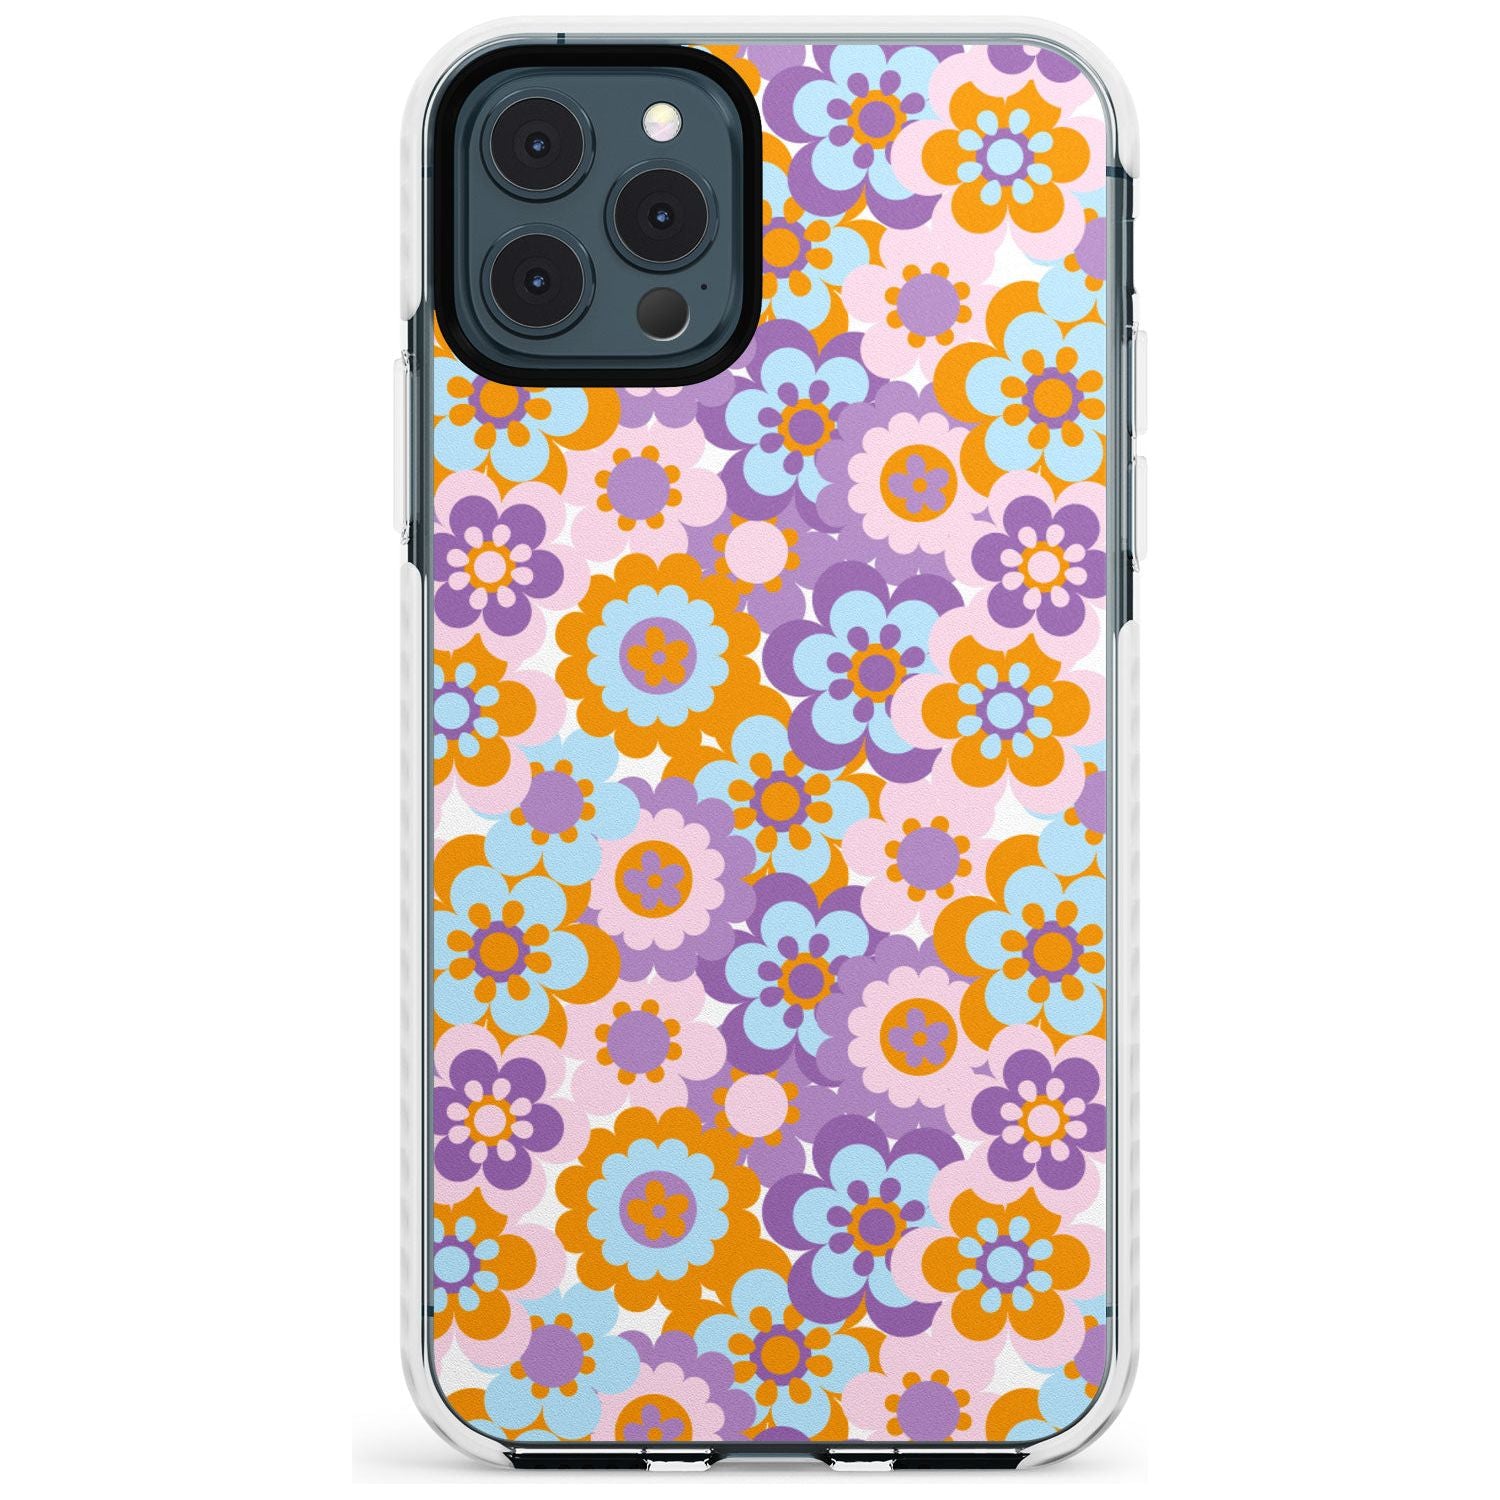 Flower Power Pattern Impact Phone Case for iPhone 11 Pro Max